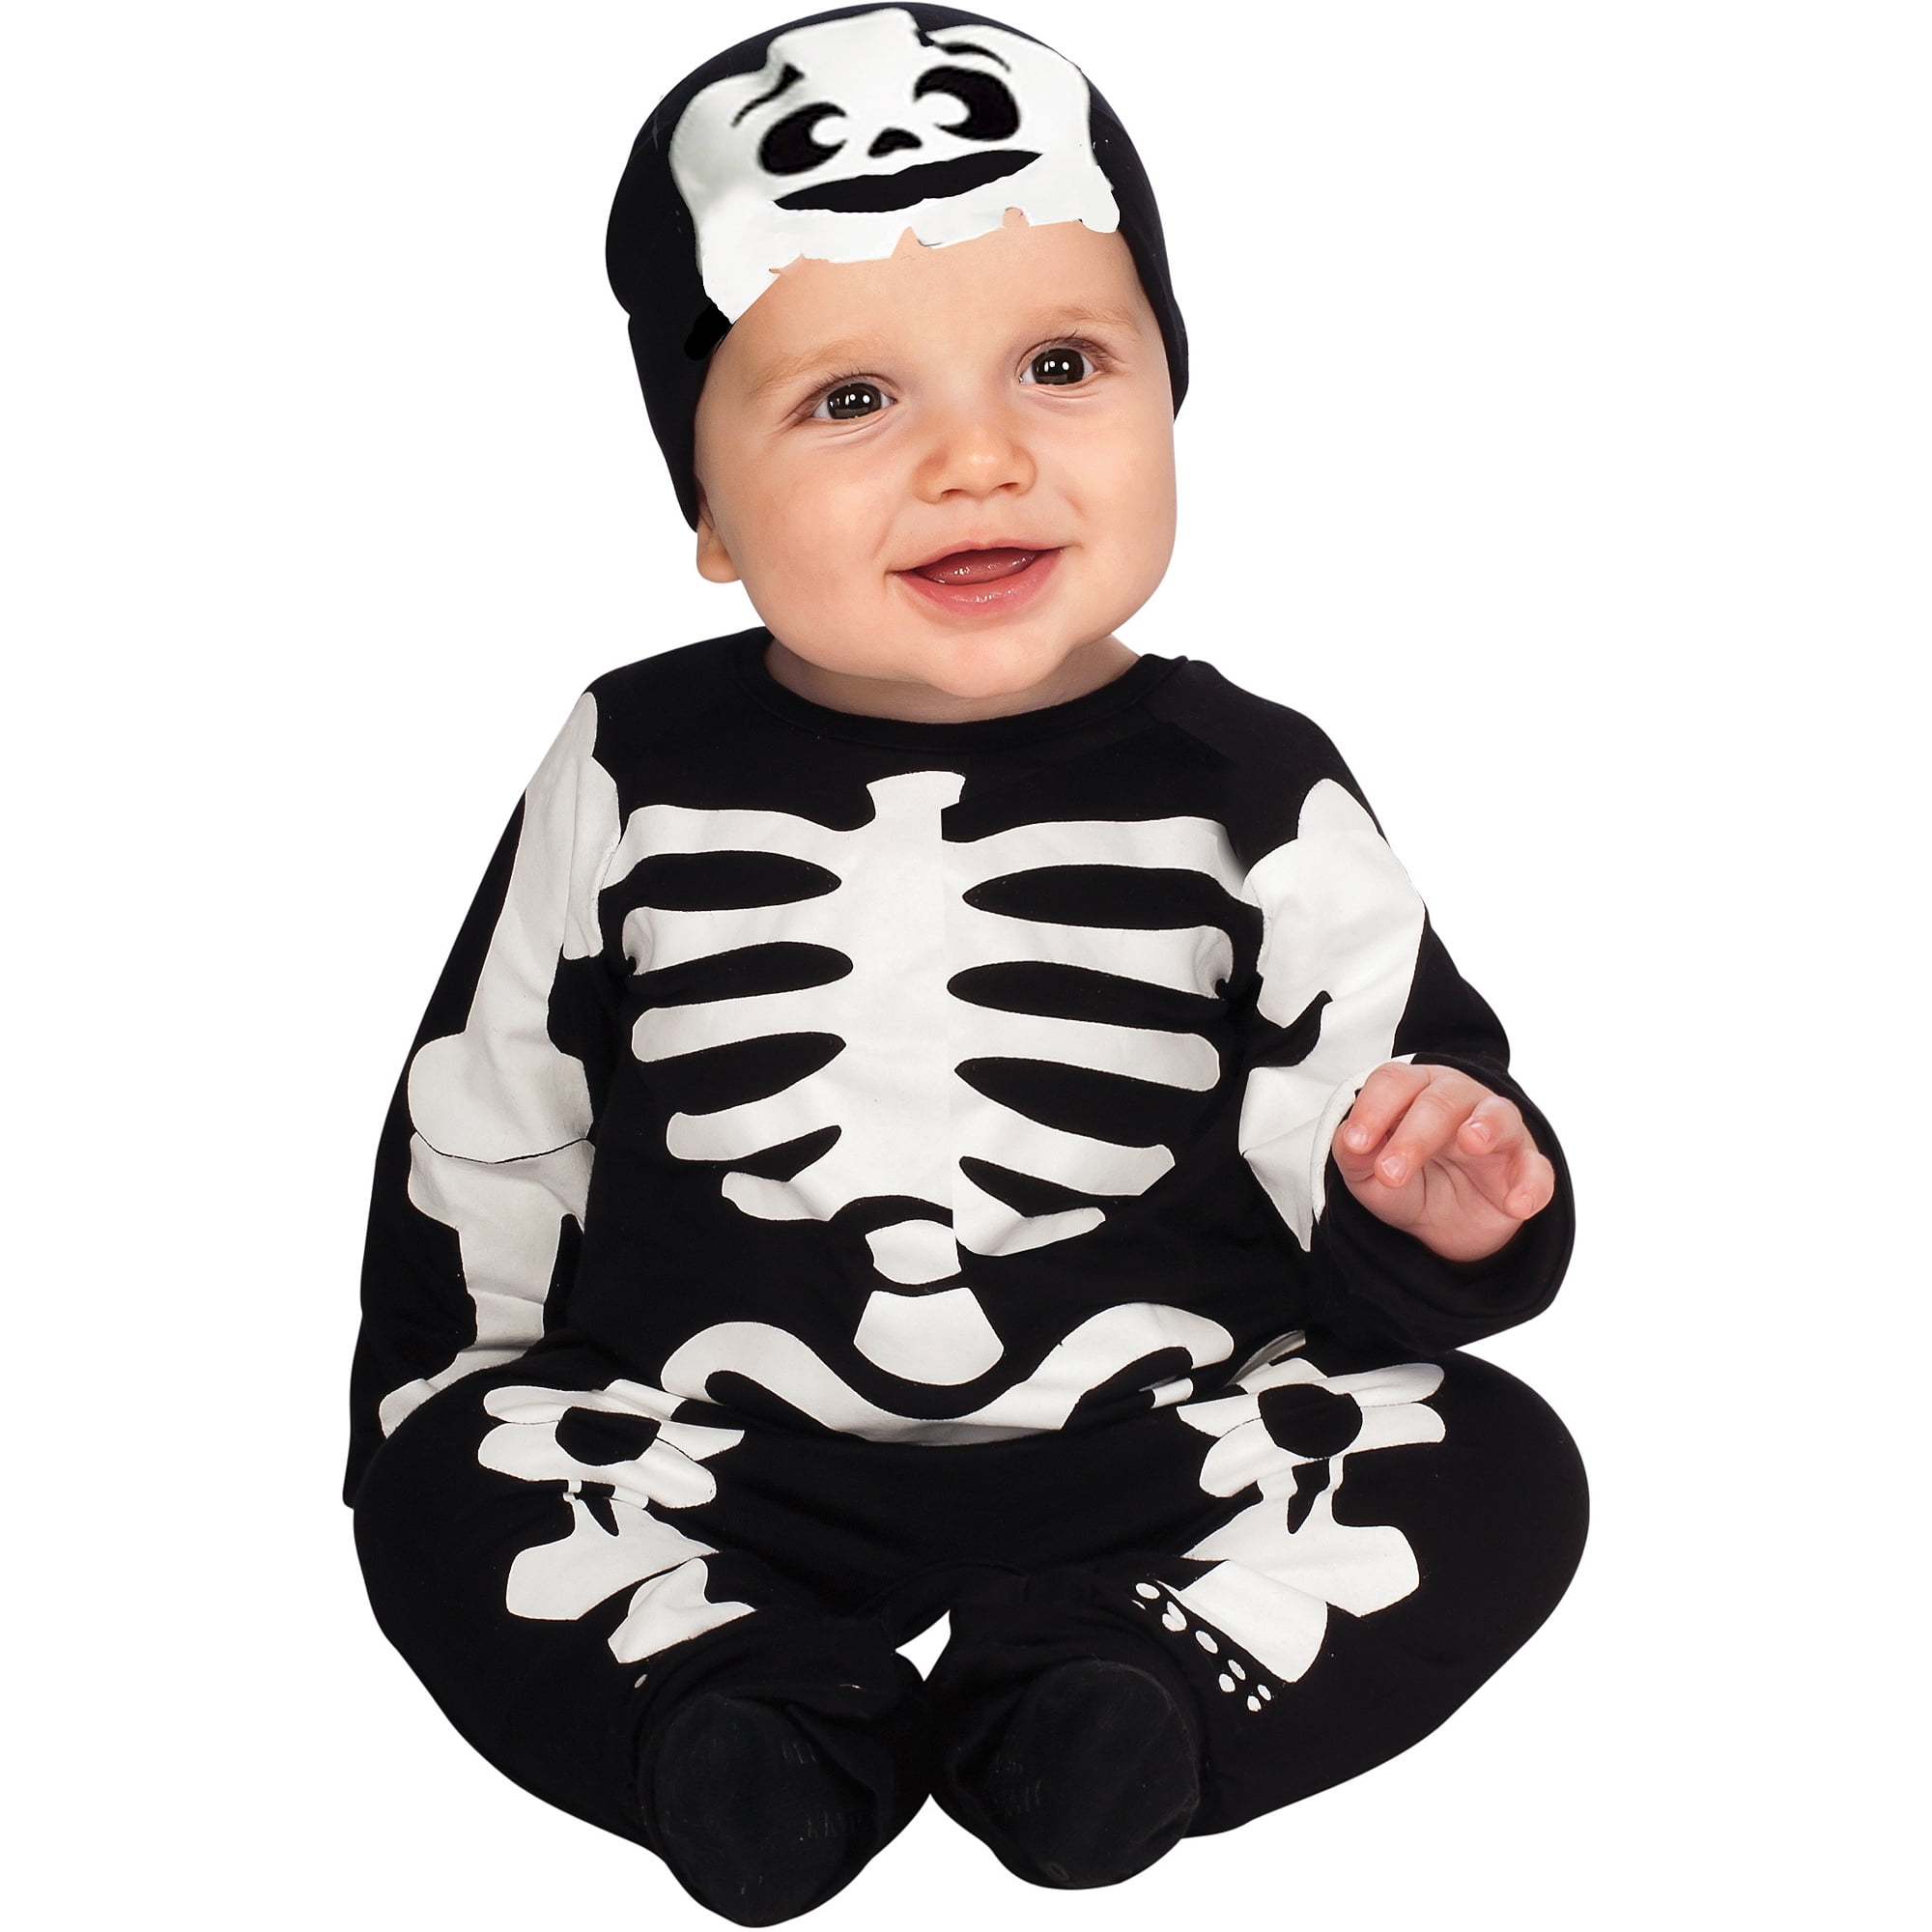 Baby Skeleton Romper Suit Halloween Funny Costume Play suit Clothes 